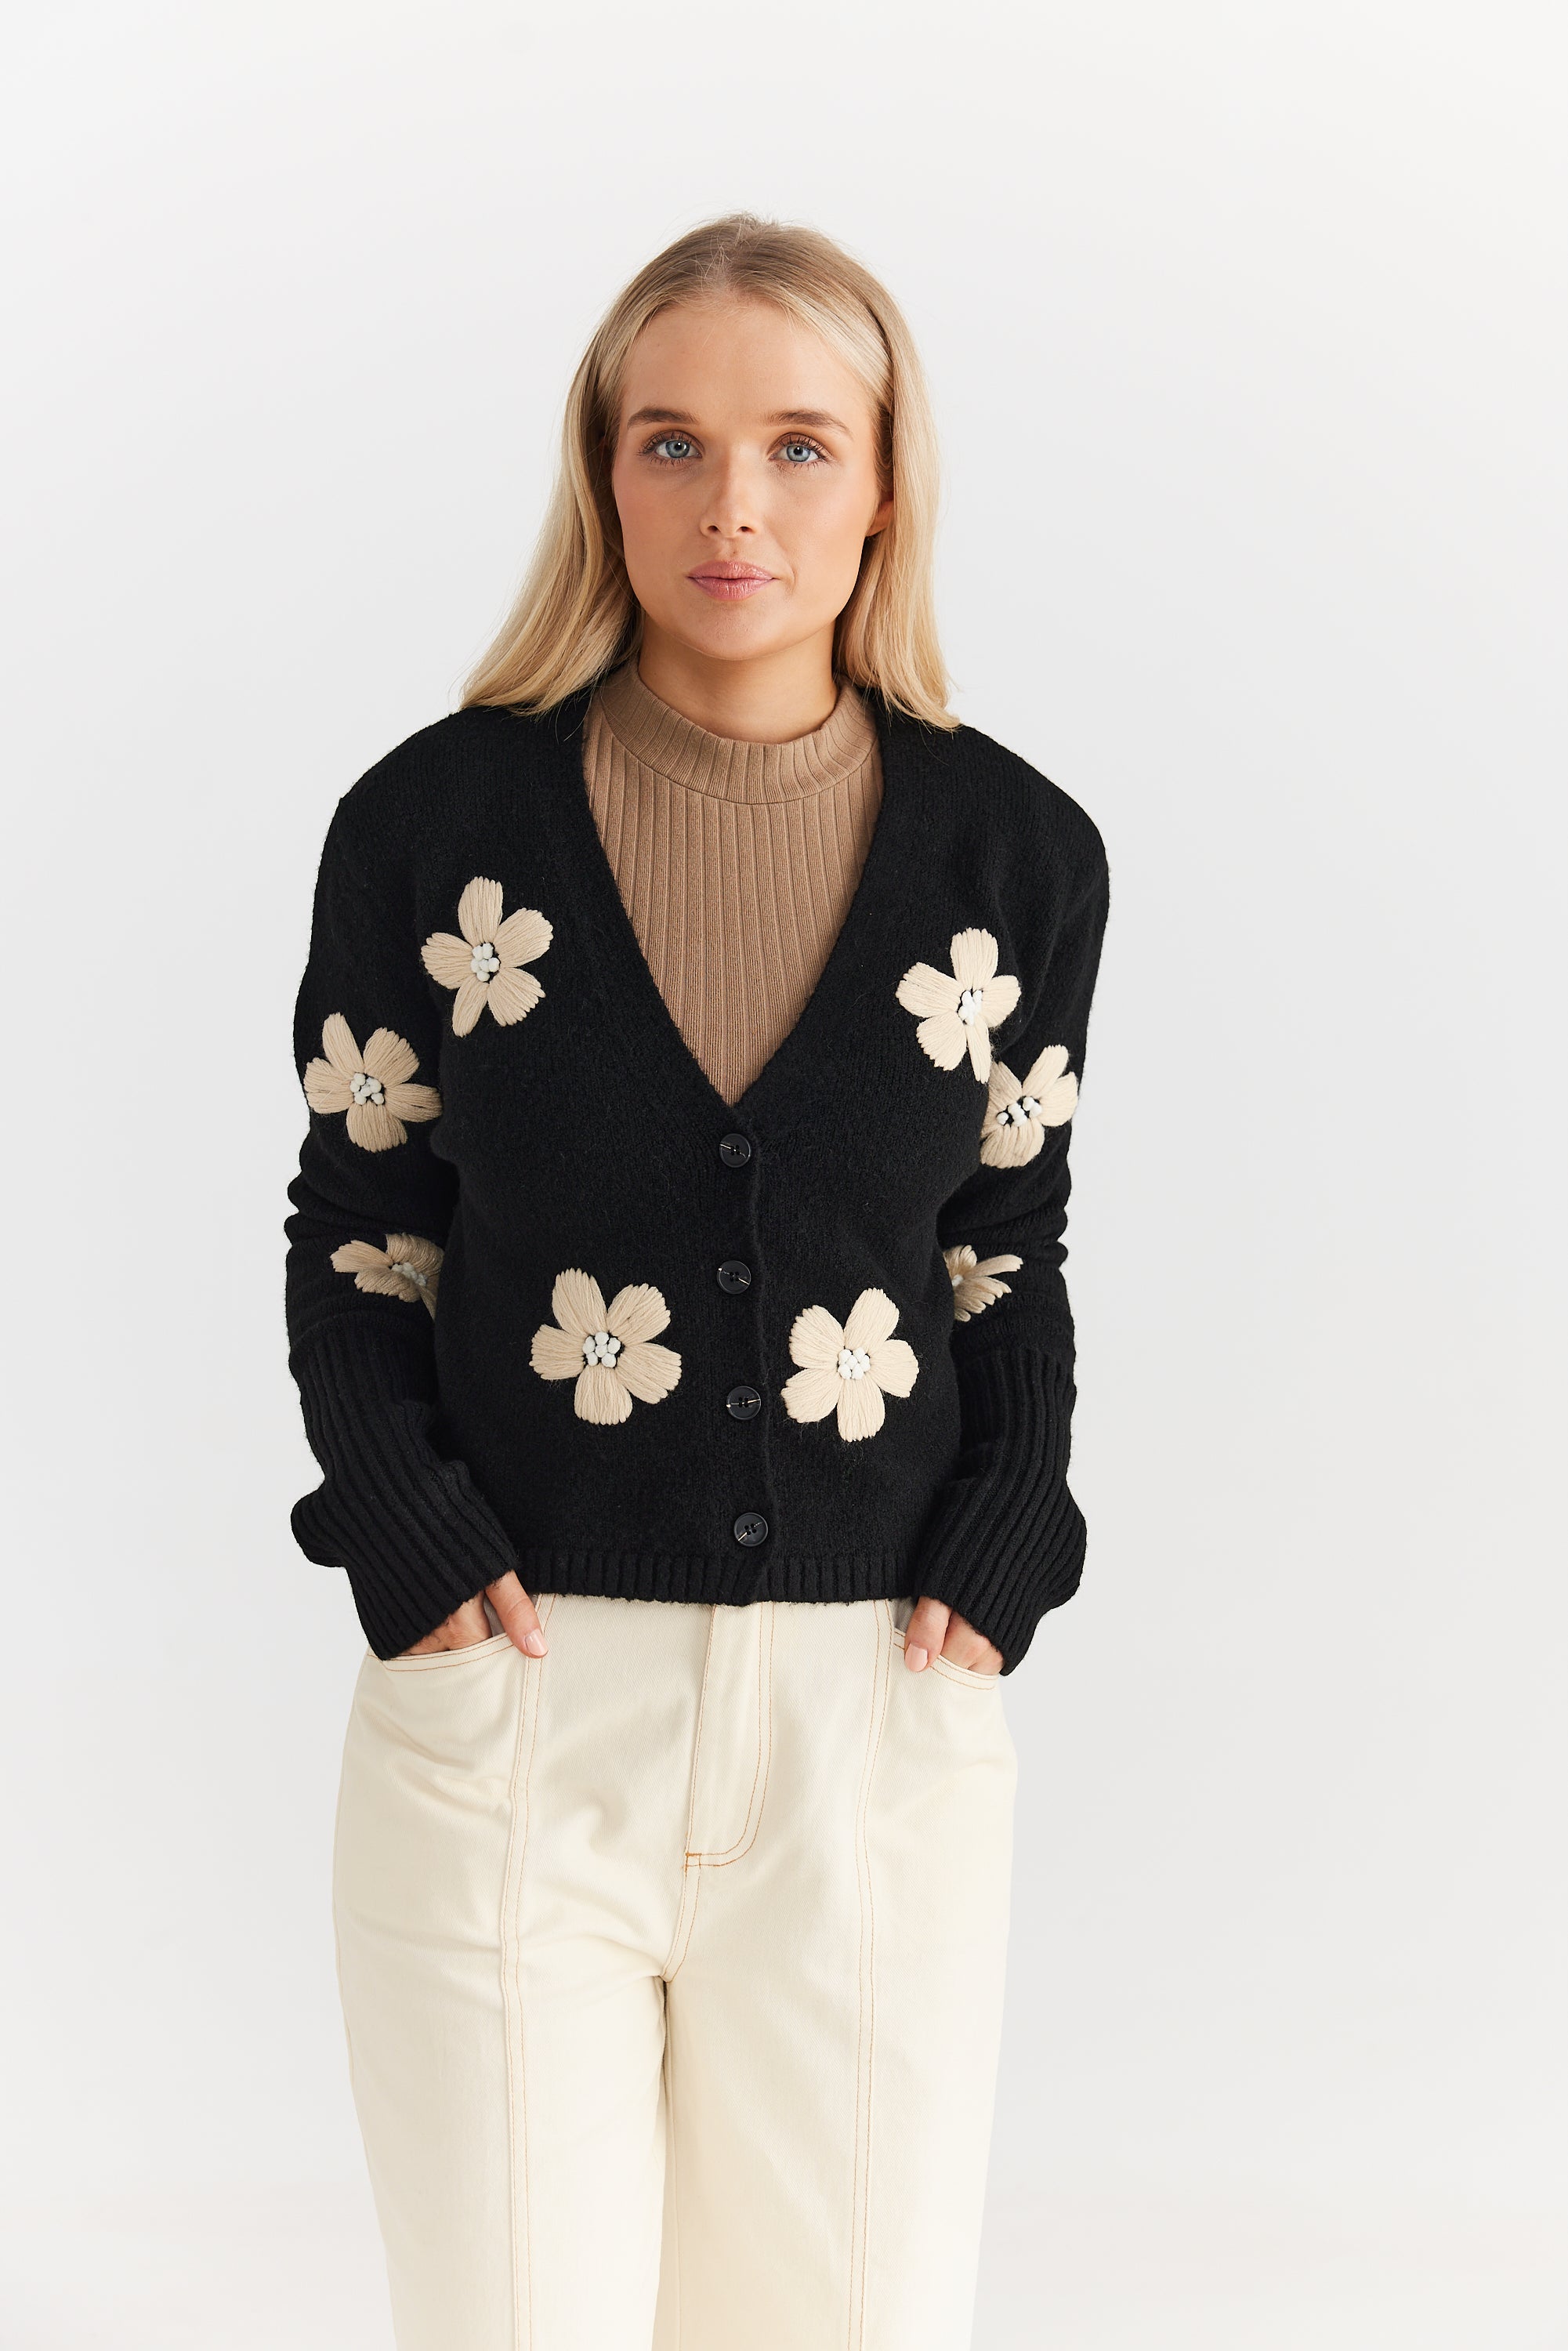 Bloom Cardigan - Black-Knitwear & Jumpers-Daisy Says-The Bay Room